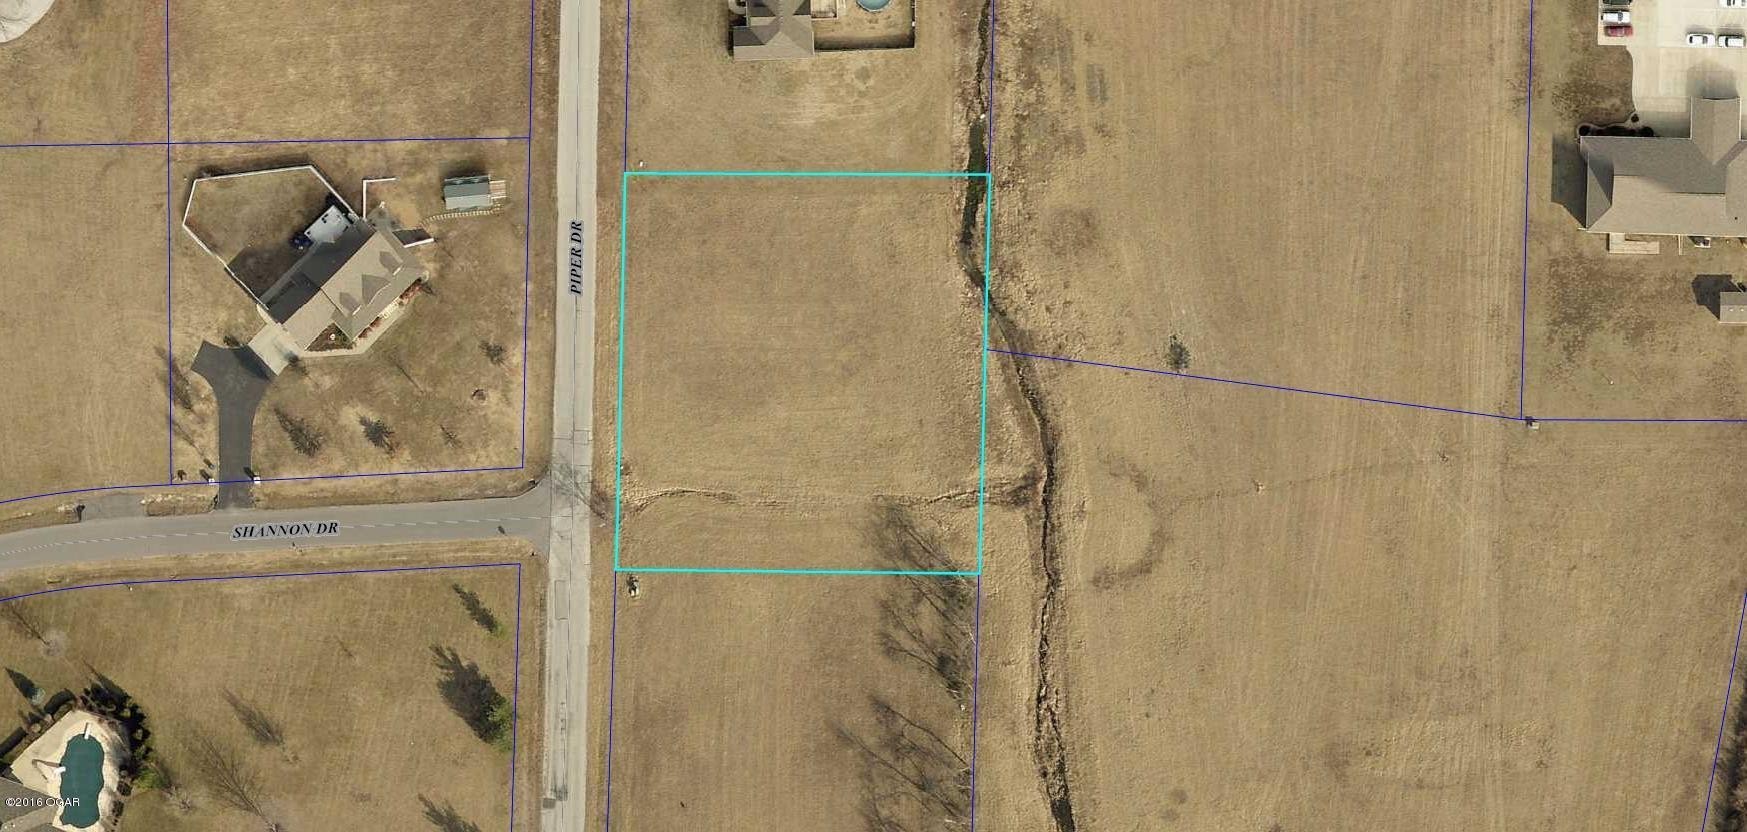 3. Lot 3 2nd Addition (Piper Dr)